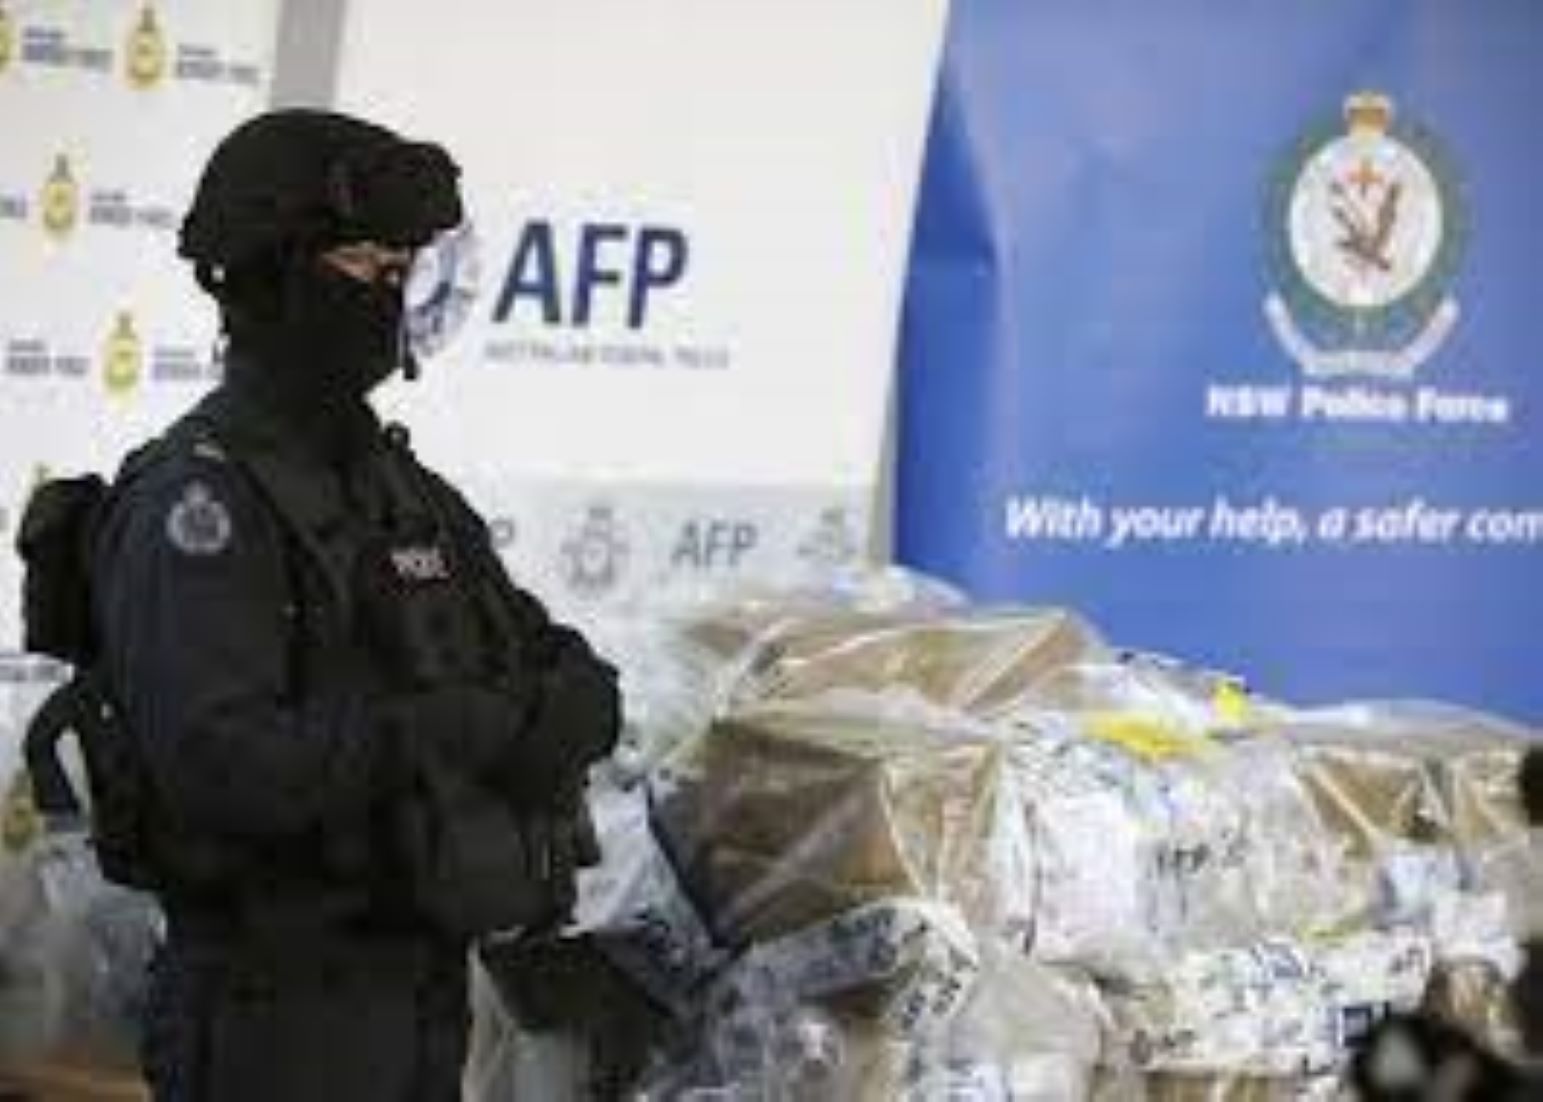 Aussie Police Charged Two Men After Seizure Of 39 Million USD Worth Of Cocaine